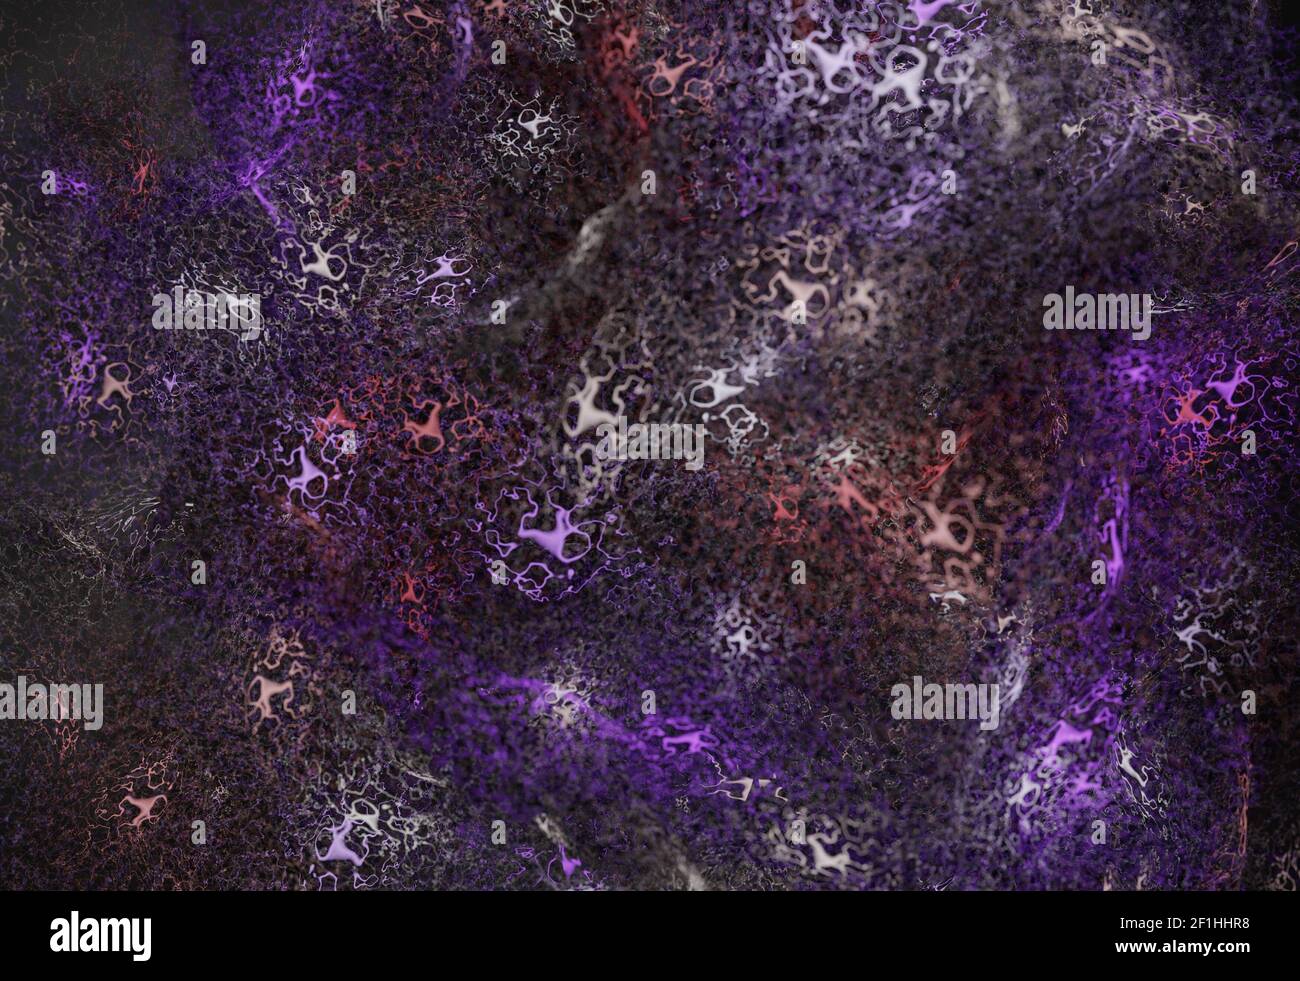 Coloful neuron links system red and blue 3d illustration Stock Photo